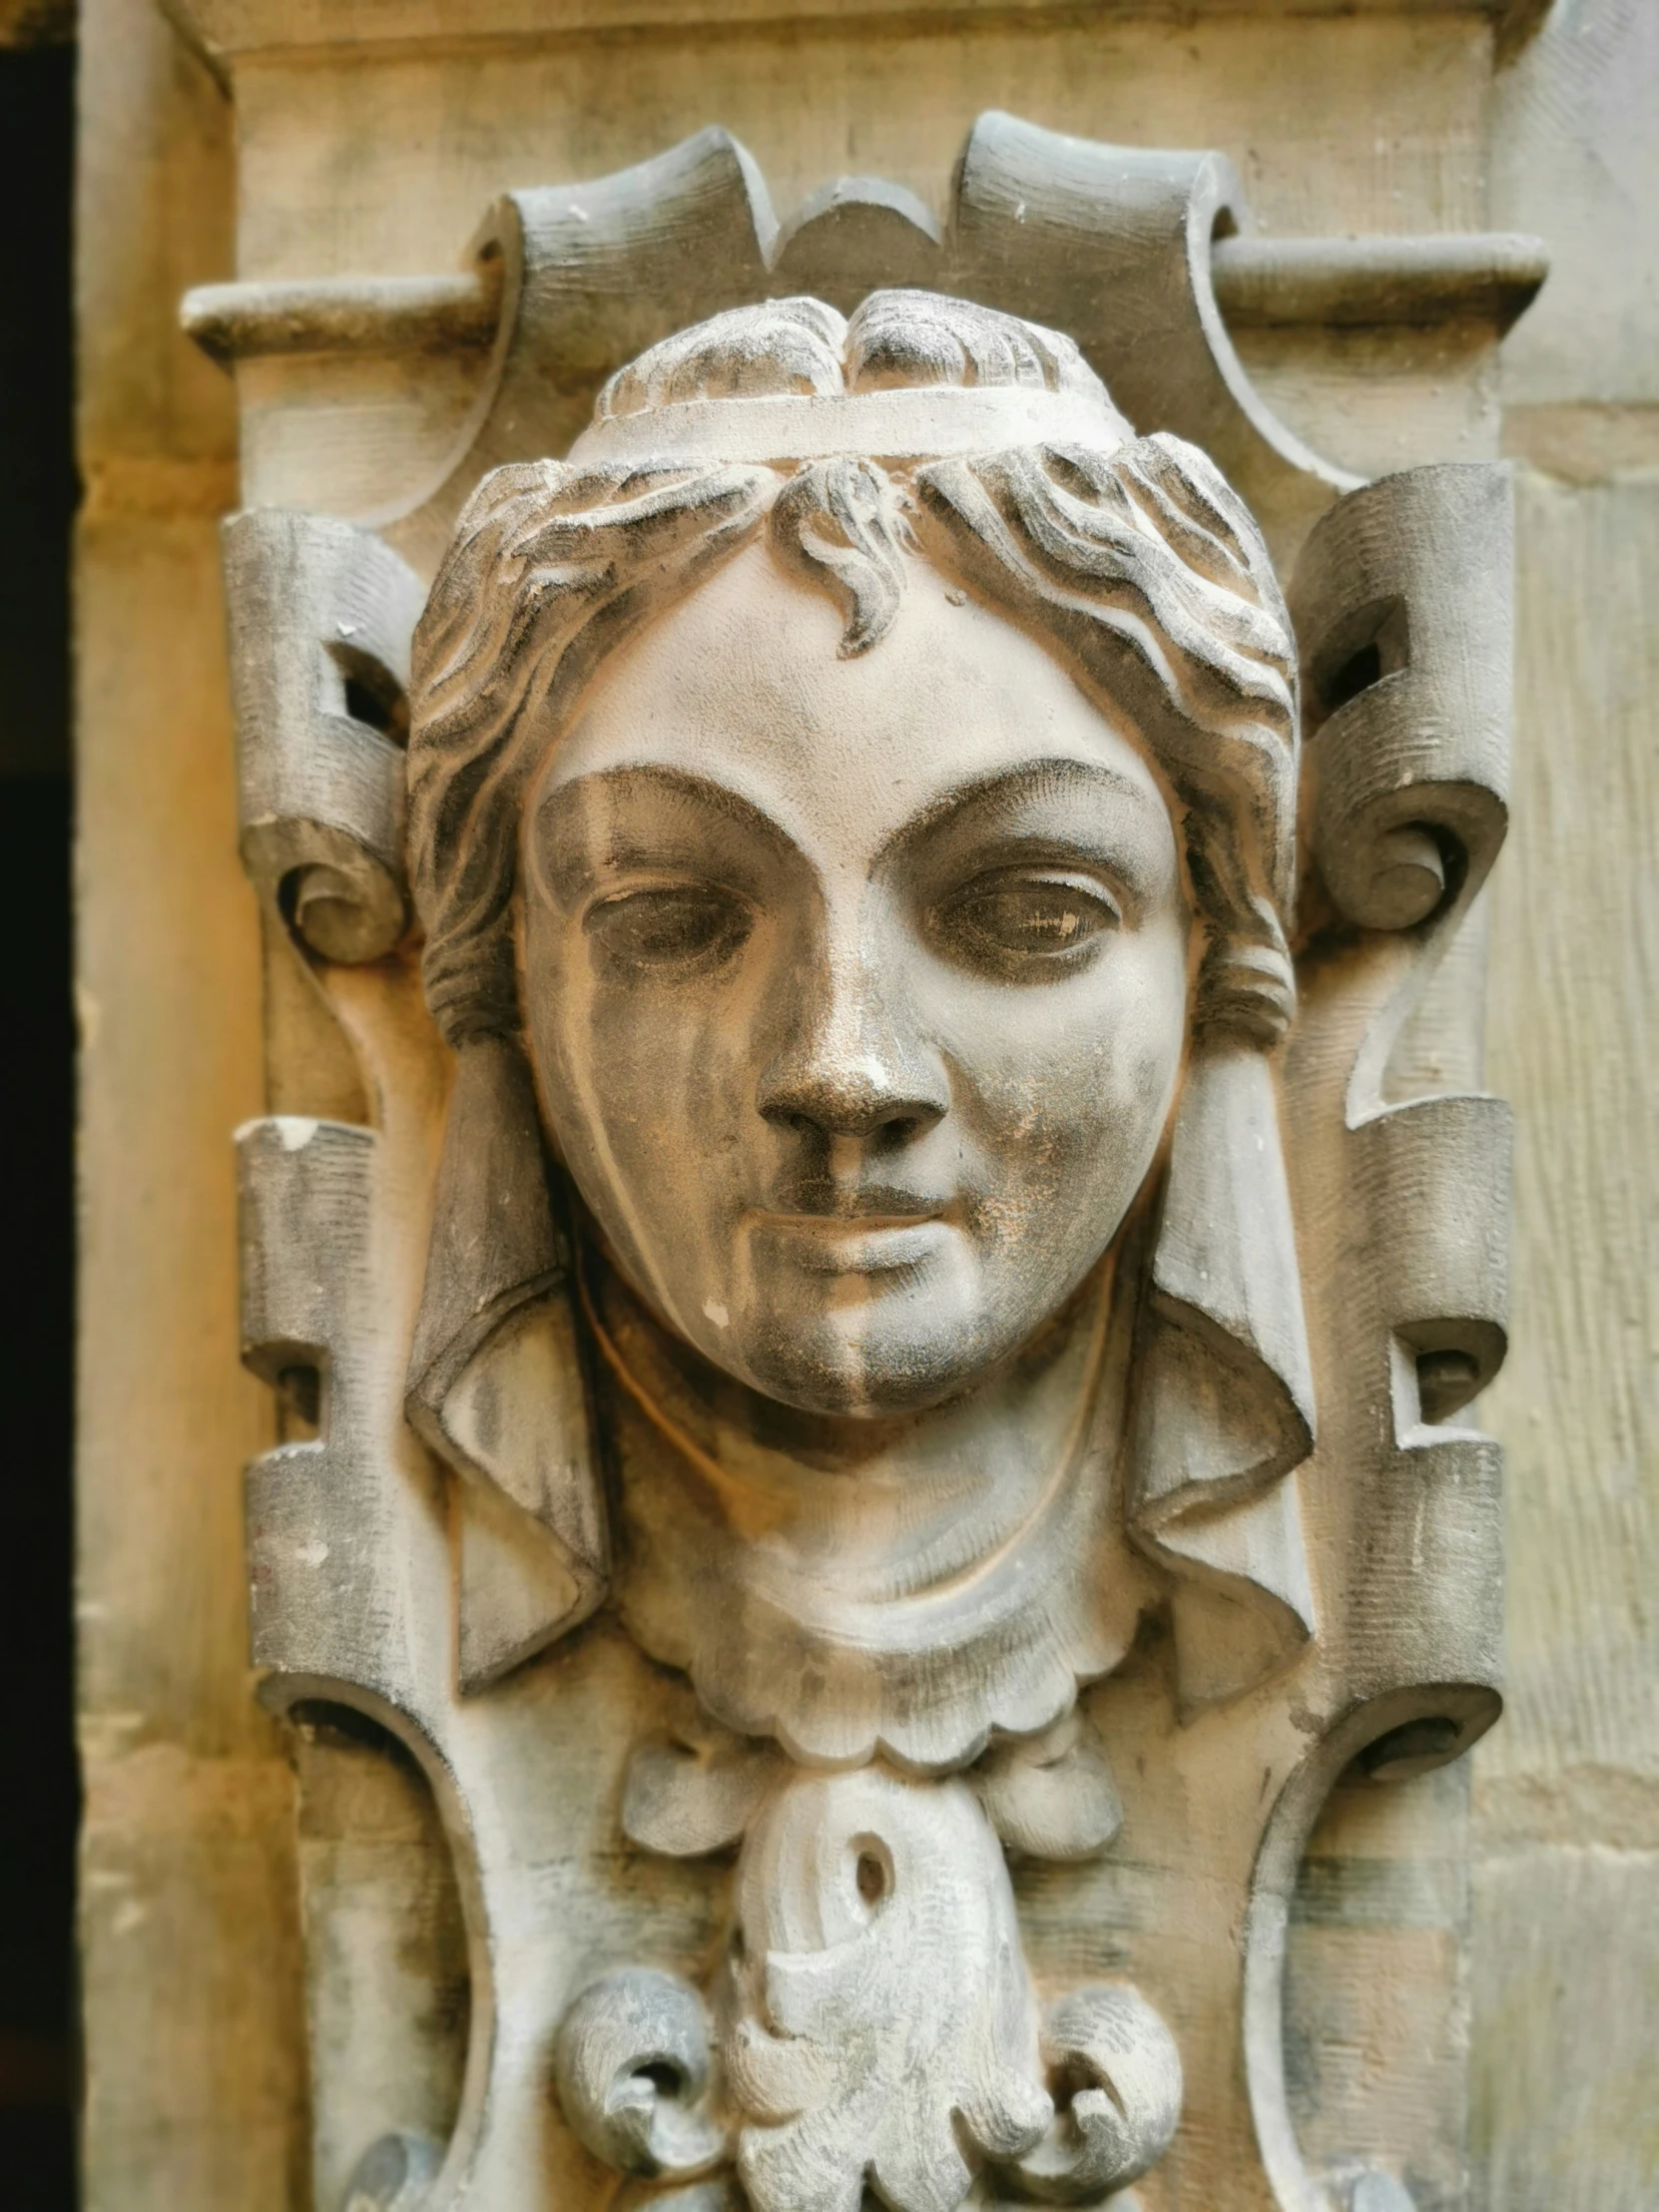 the face of an ancient sculpture with decorative decorations